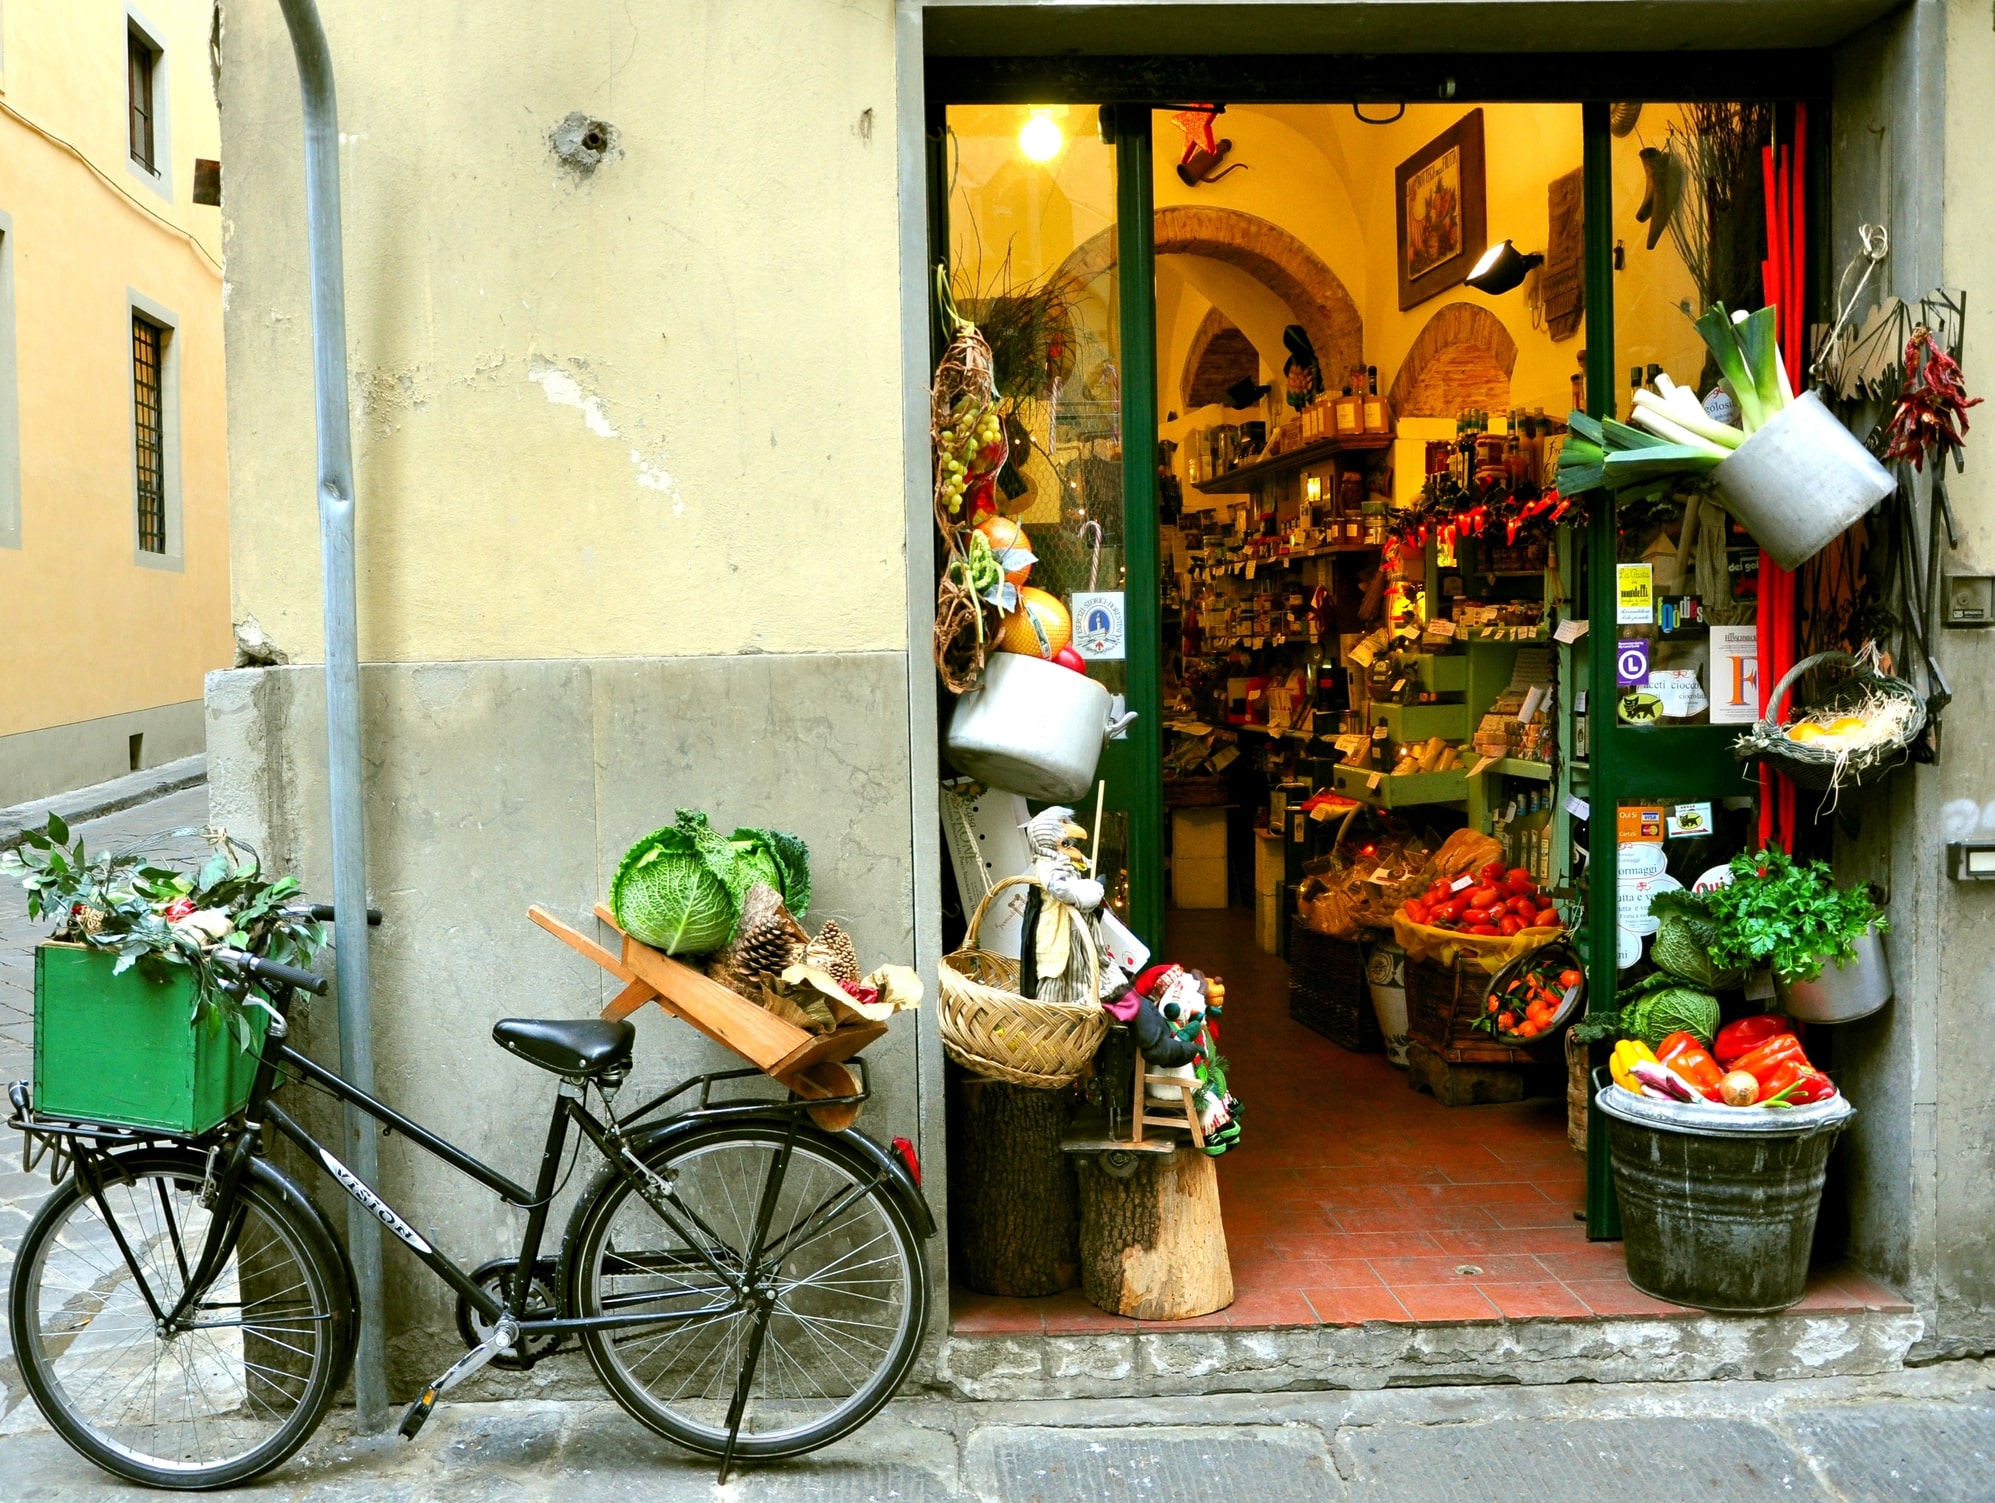 Italian ingredients in a storefront